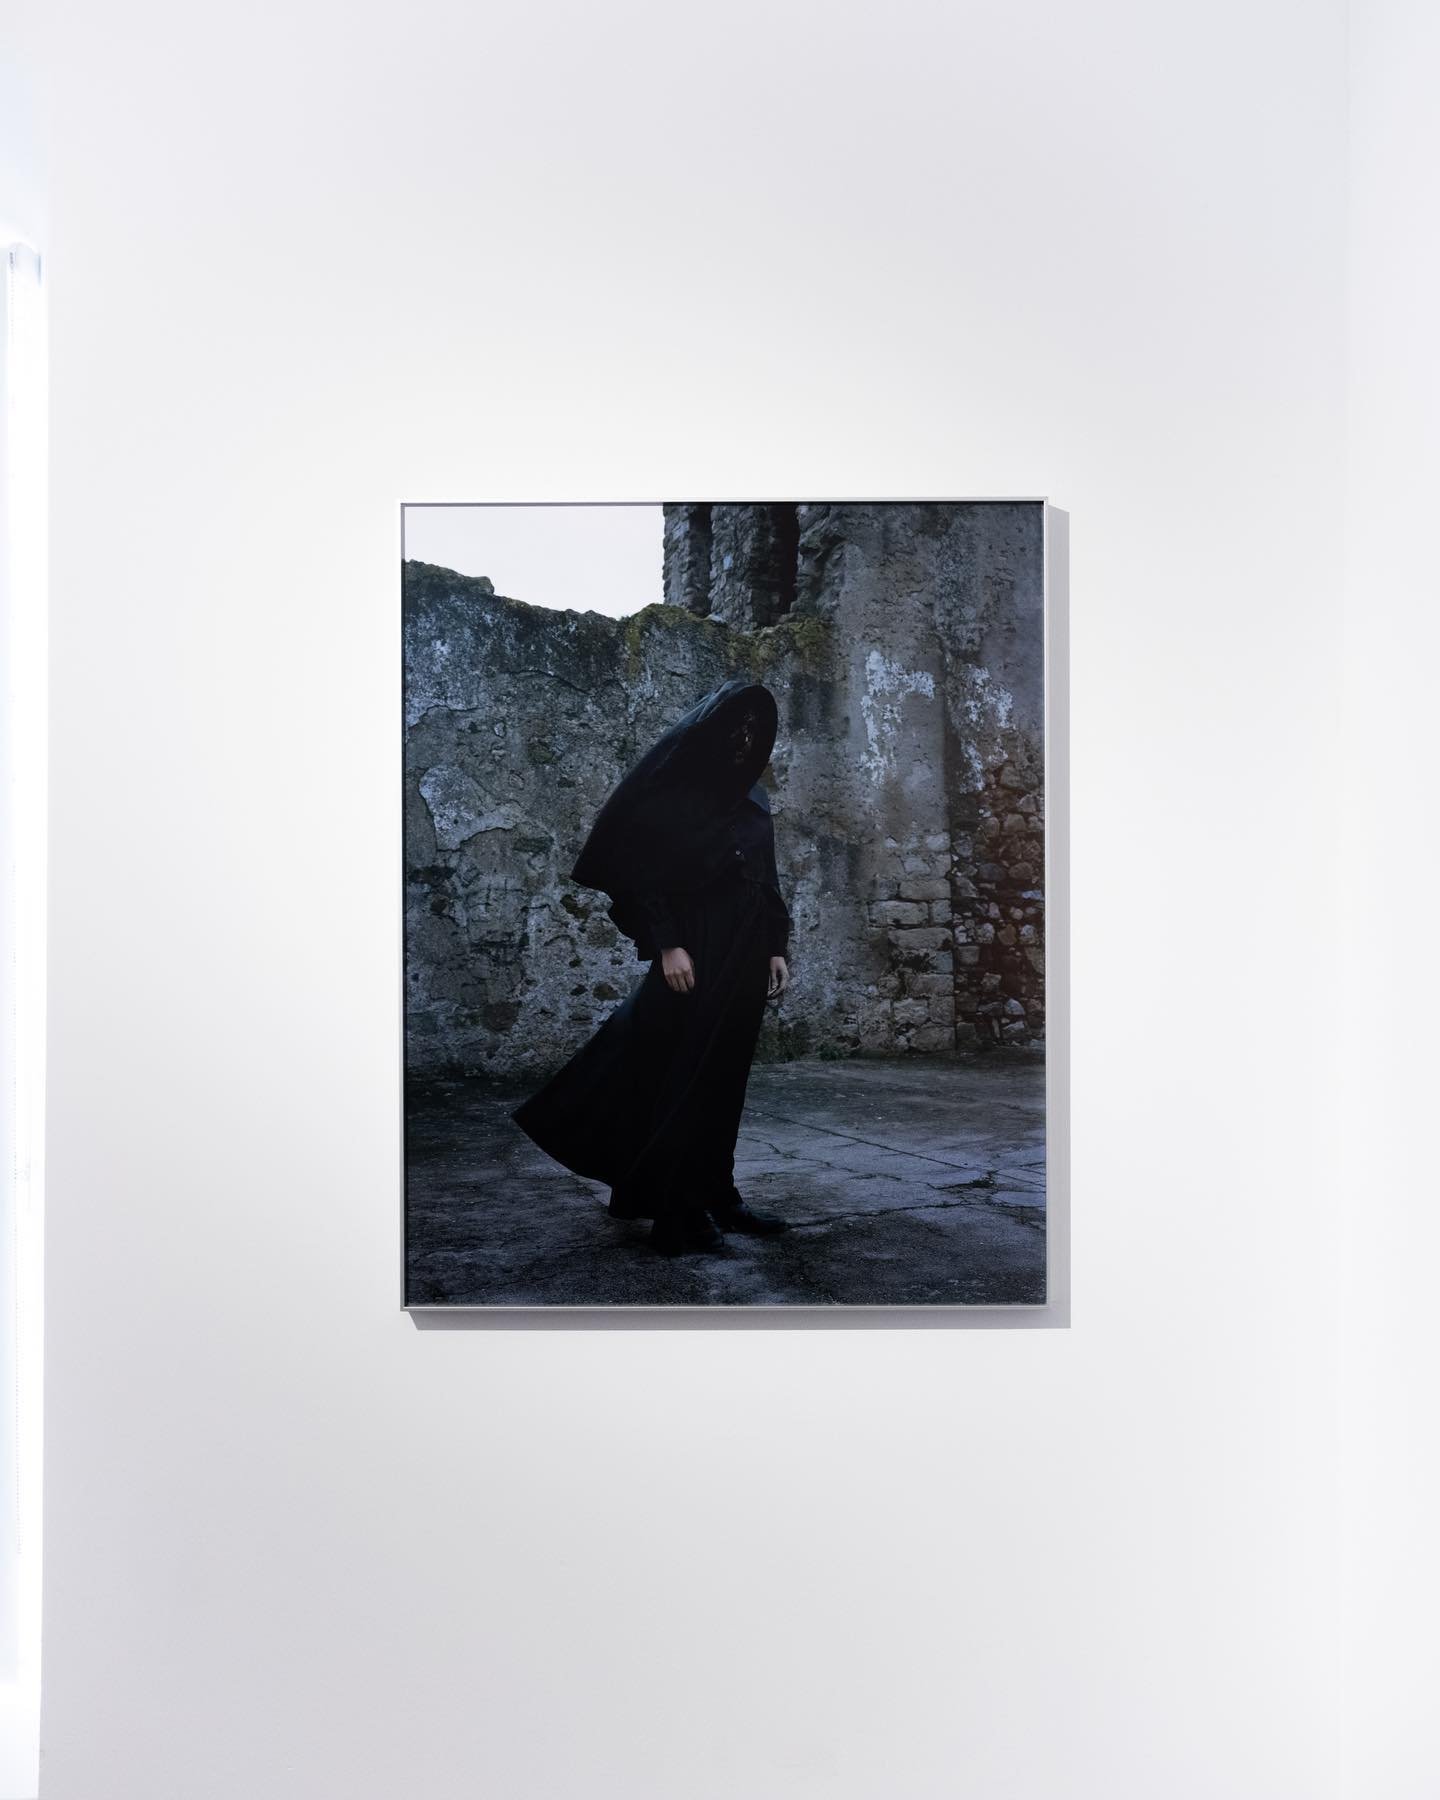 MATILDE TRAVASSOS @matildetravassos 
Abalo, 2024
Inkjet print on Fine Art Baryta paper, Nielsen frame
100x80cm | Ed. 1/3 + 1A.P.
More info on request 

&lsquo;ABALO&rsquo;, by @manueltainha and @matildetravassos 

The inevitable finiteness of being a